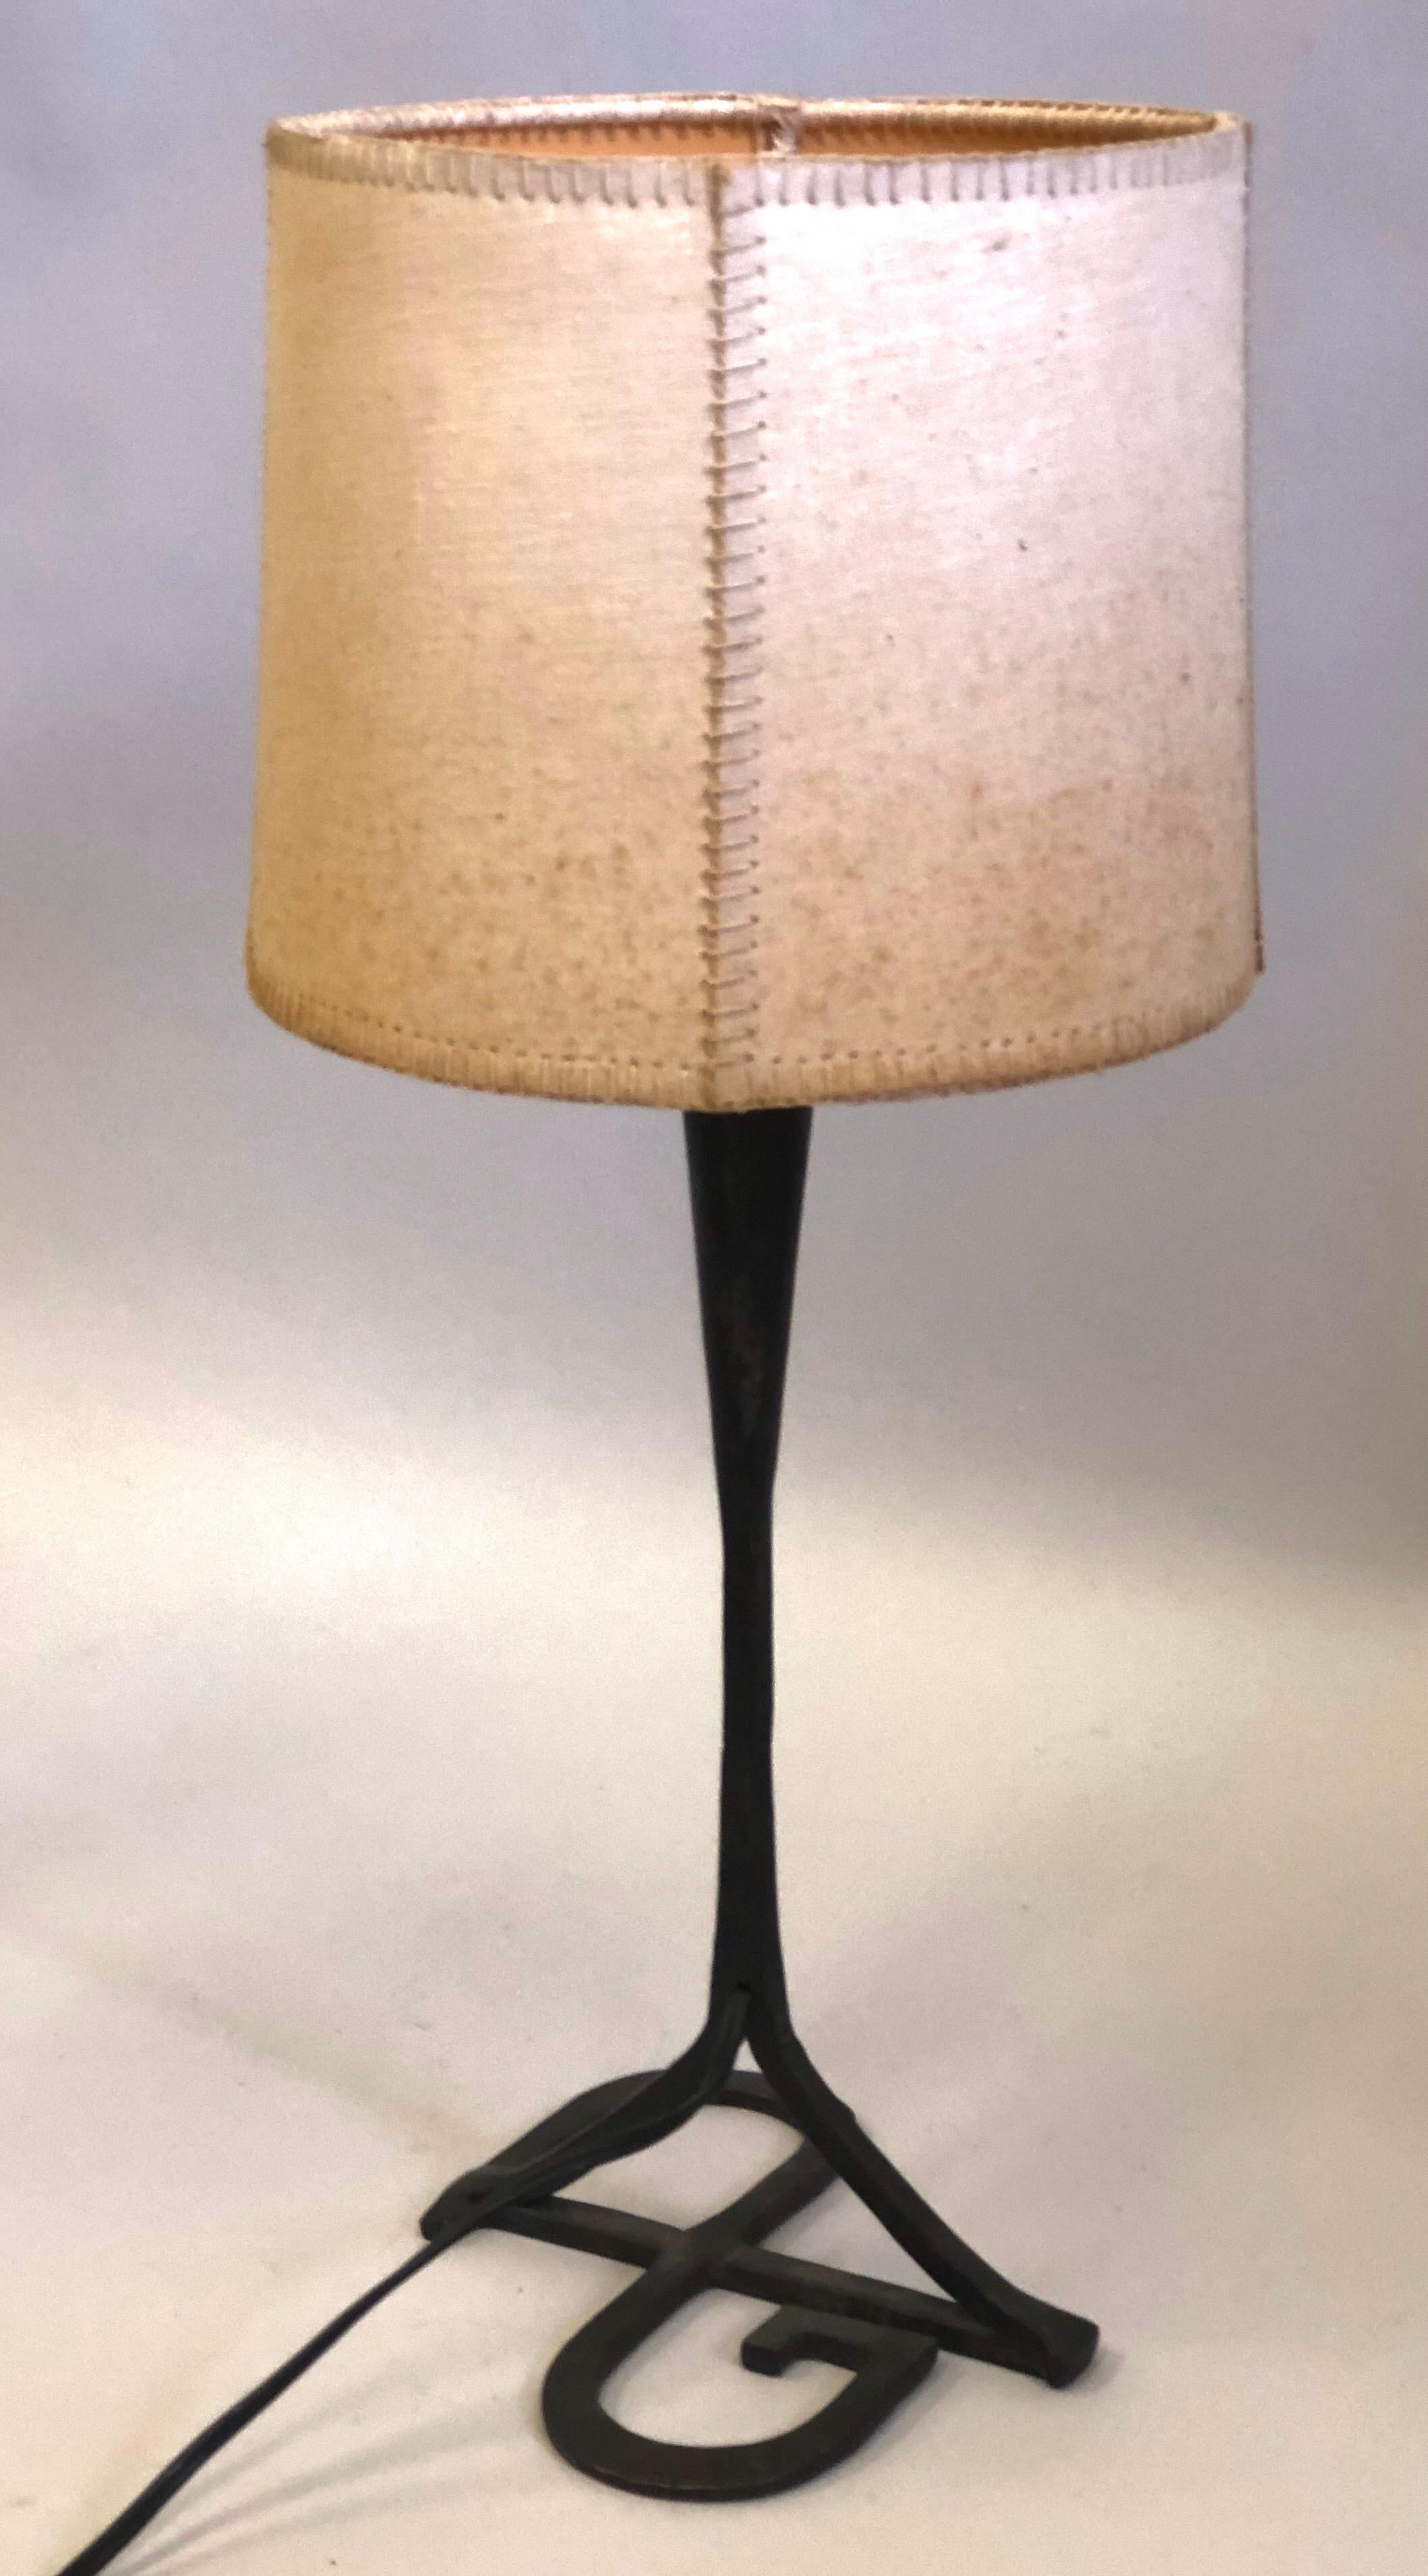 An Elegant, hand made, Unique French Mid-Century Modern table lamp or desk lamp in hand forged and hand-hammered iron with a parchment shade attributed to Gilbert Poillerat. The base is formed with the unity of the initials GP which stands for the